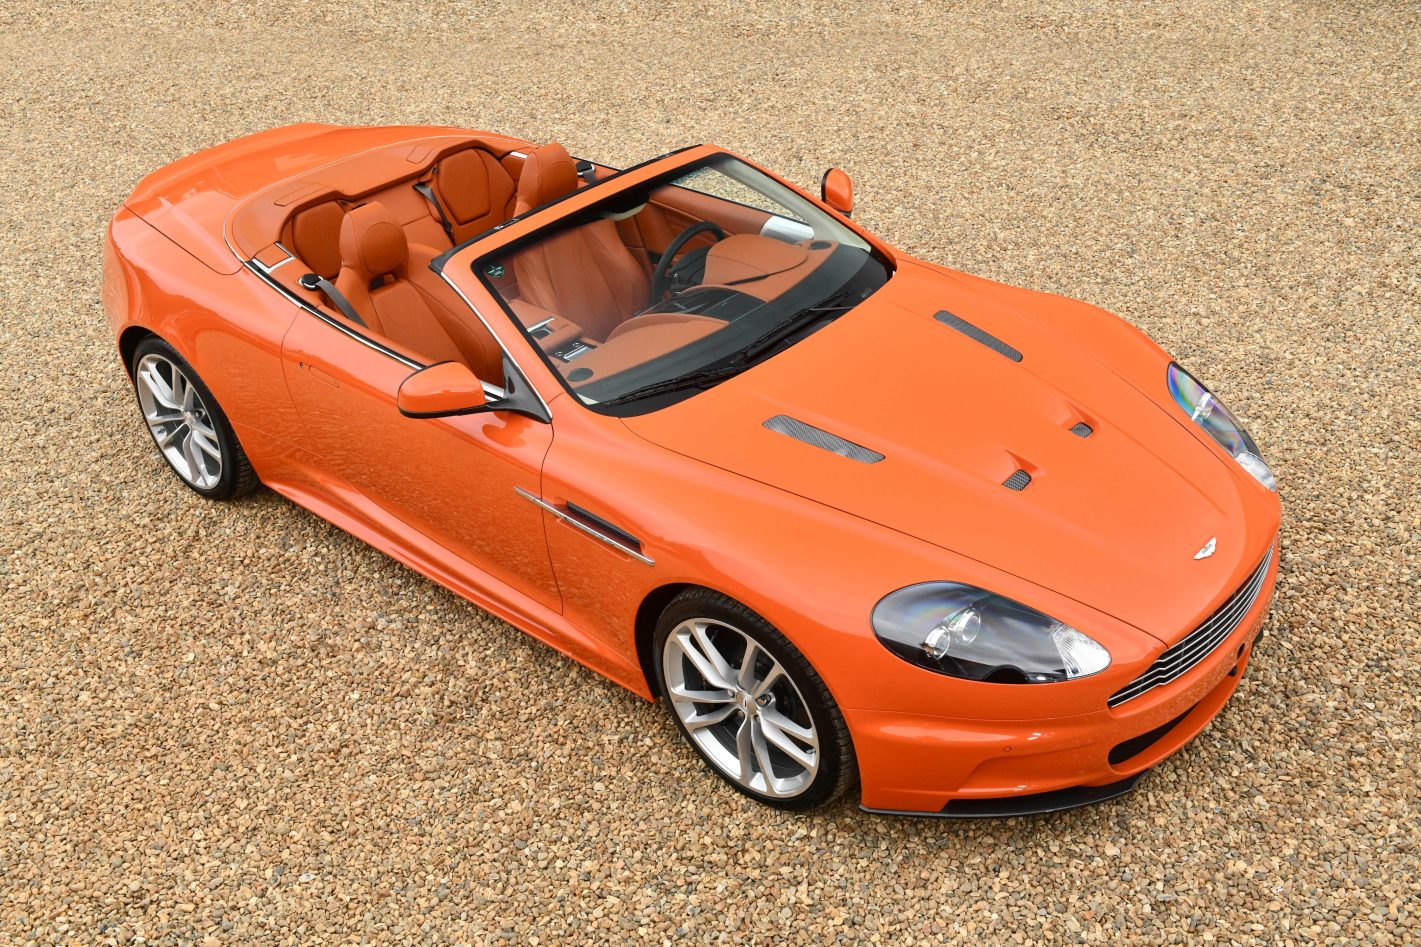 Aston Martin special orange collection up for sale, aston martin, auctions, Bonhams, Cars for sale